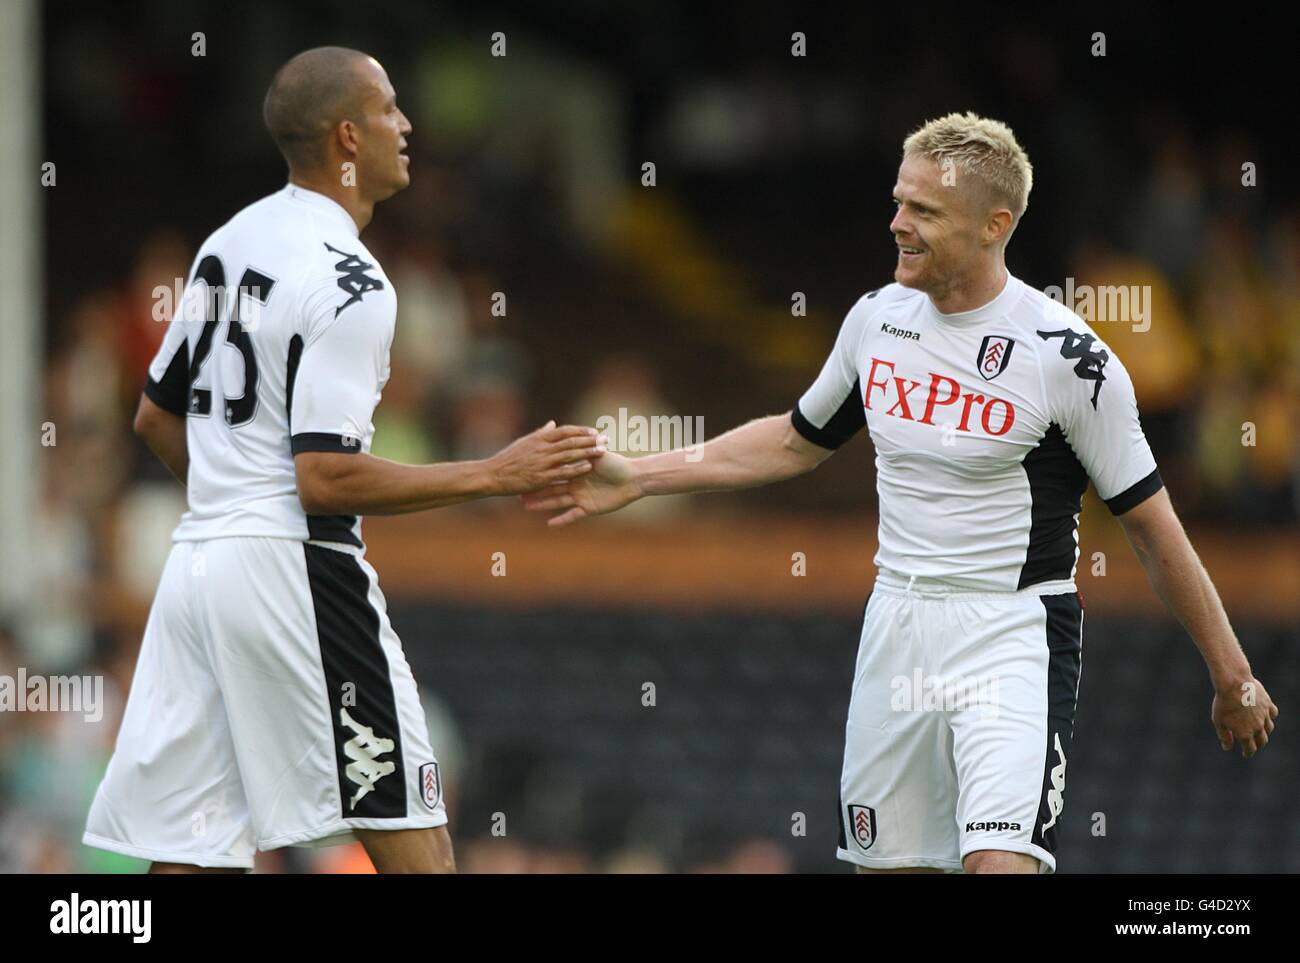 Soccer - UEFA Europa League - First Qualifying Round - First Leg - Fulham v NSI Runavik - Craven Cottage. Fulham's Bobby Zamora (left) congratulates team-mate Damien Duff on scoring their first goal of the game Stock Photo